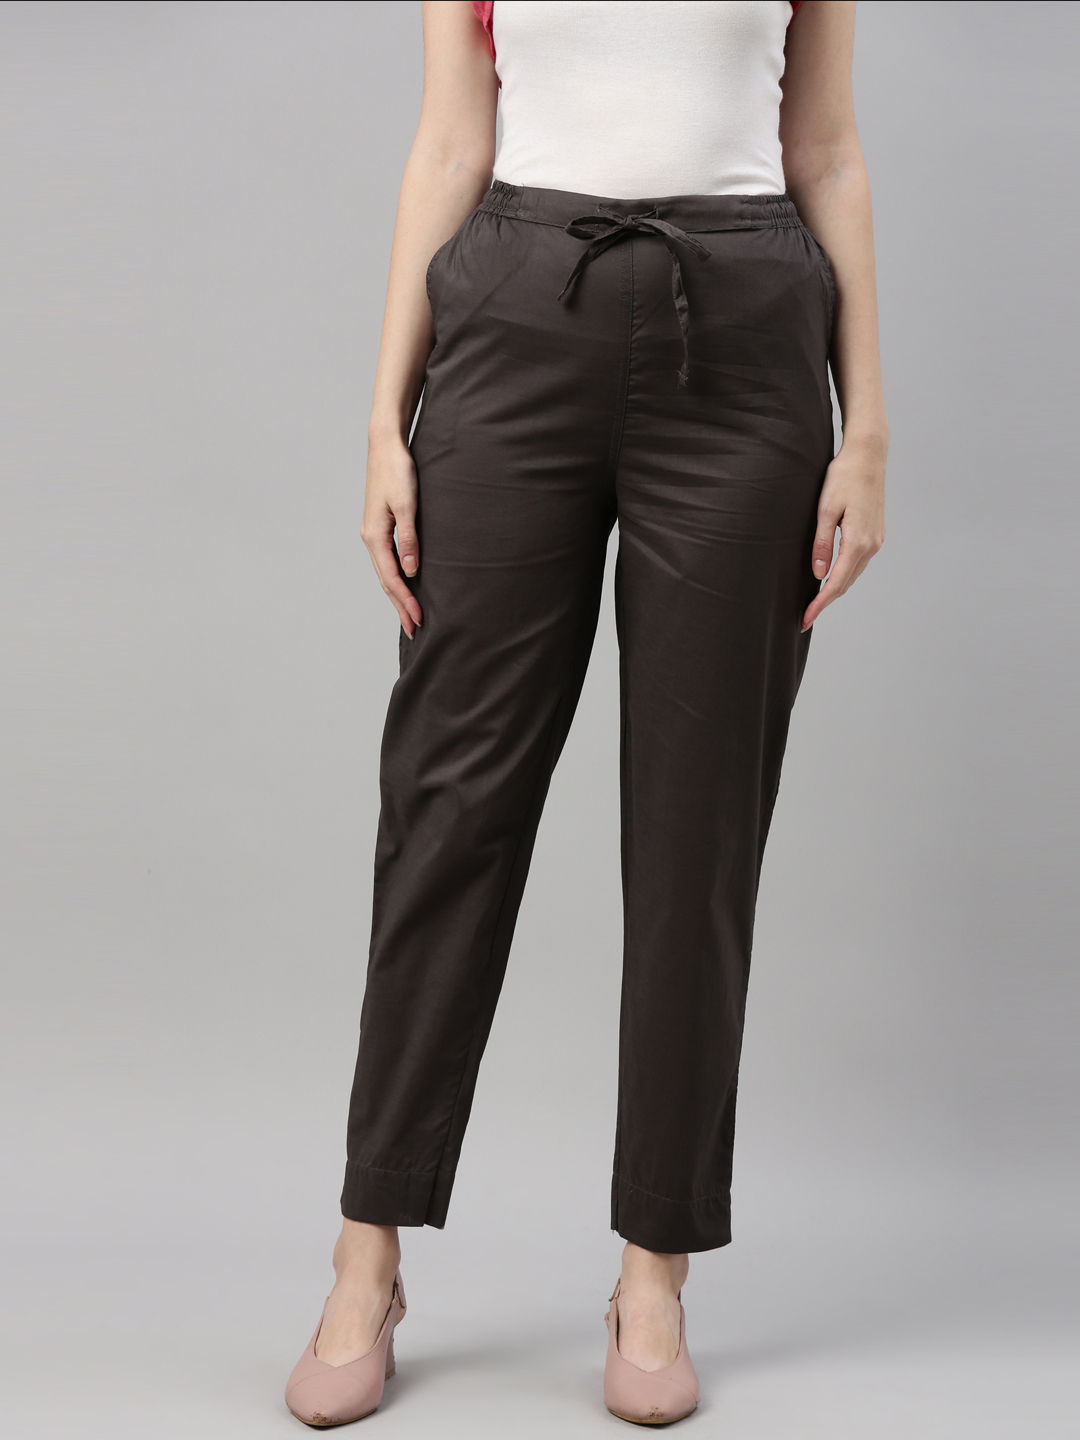 Buy Grey Solid Pants Online - W for Woman